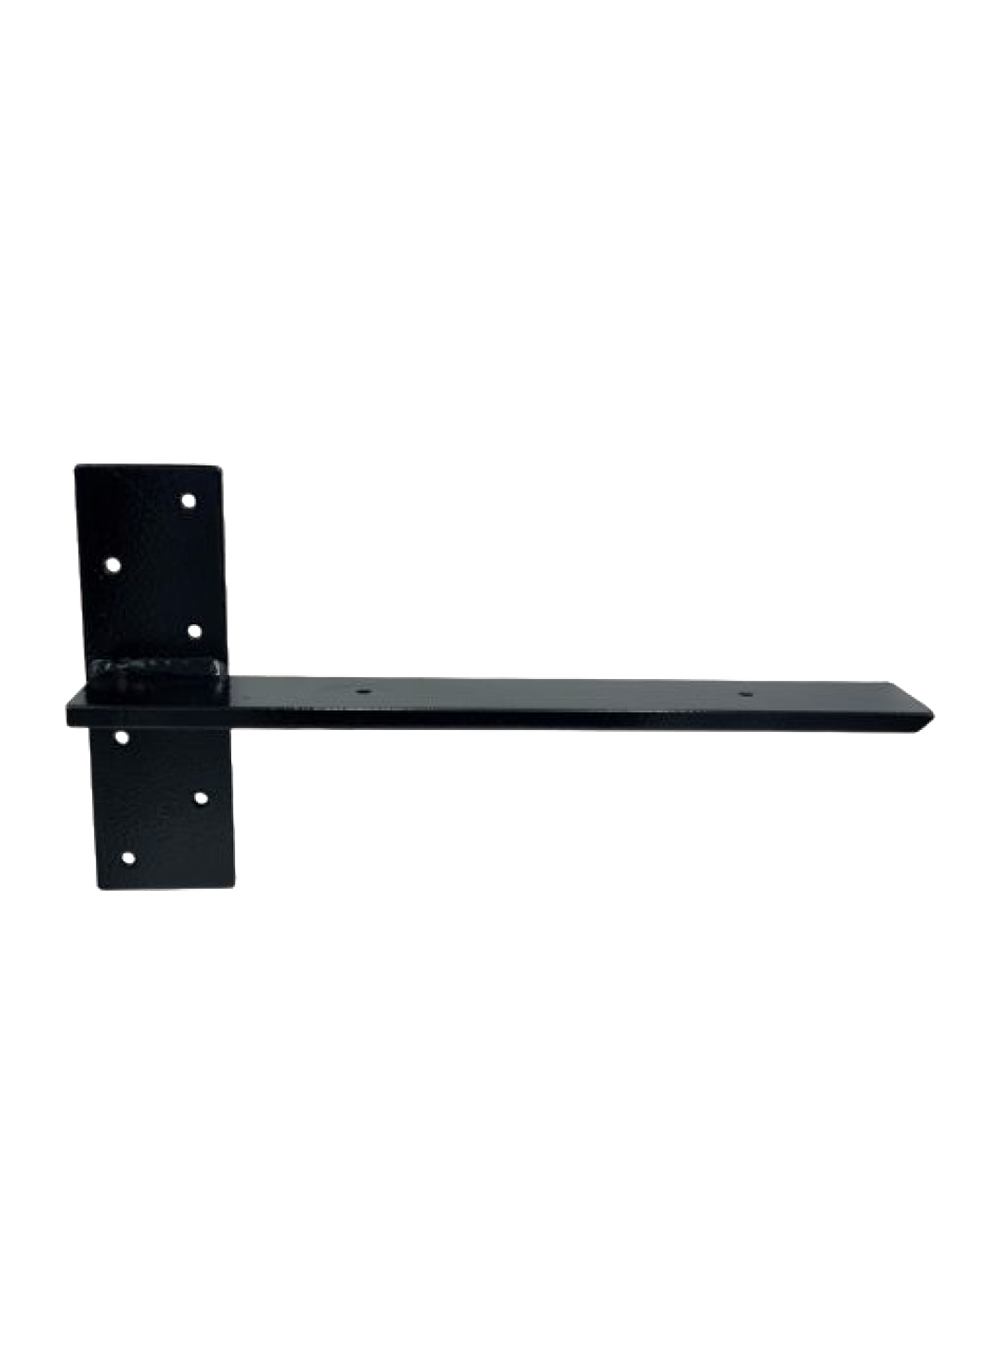 What is the width of the bracket arm?